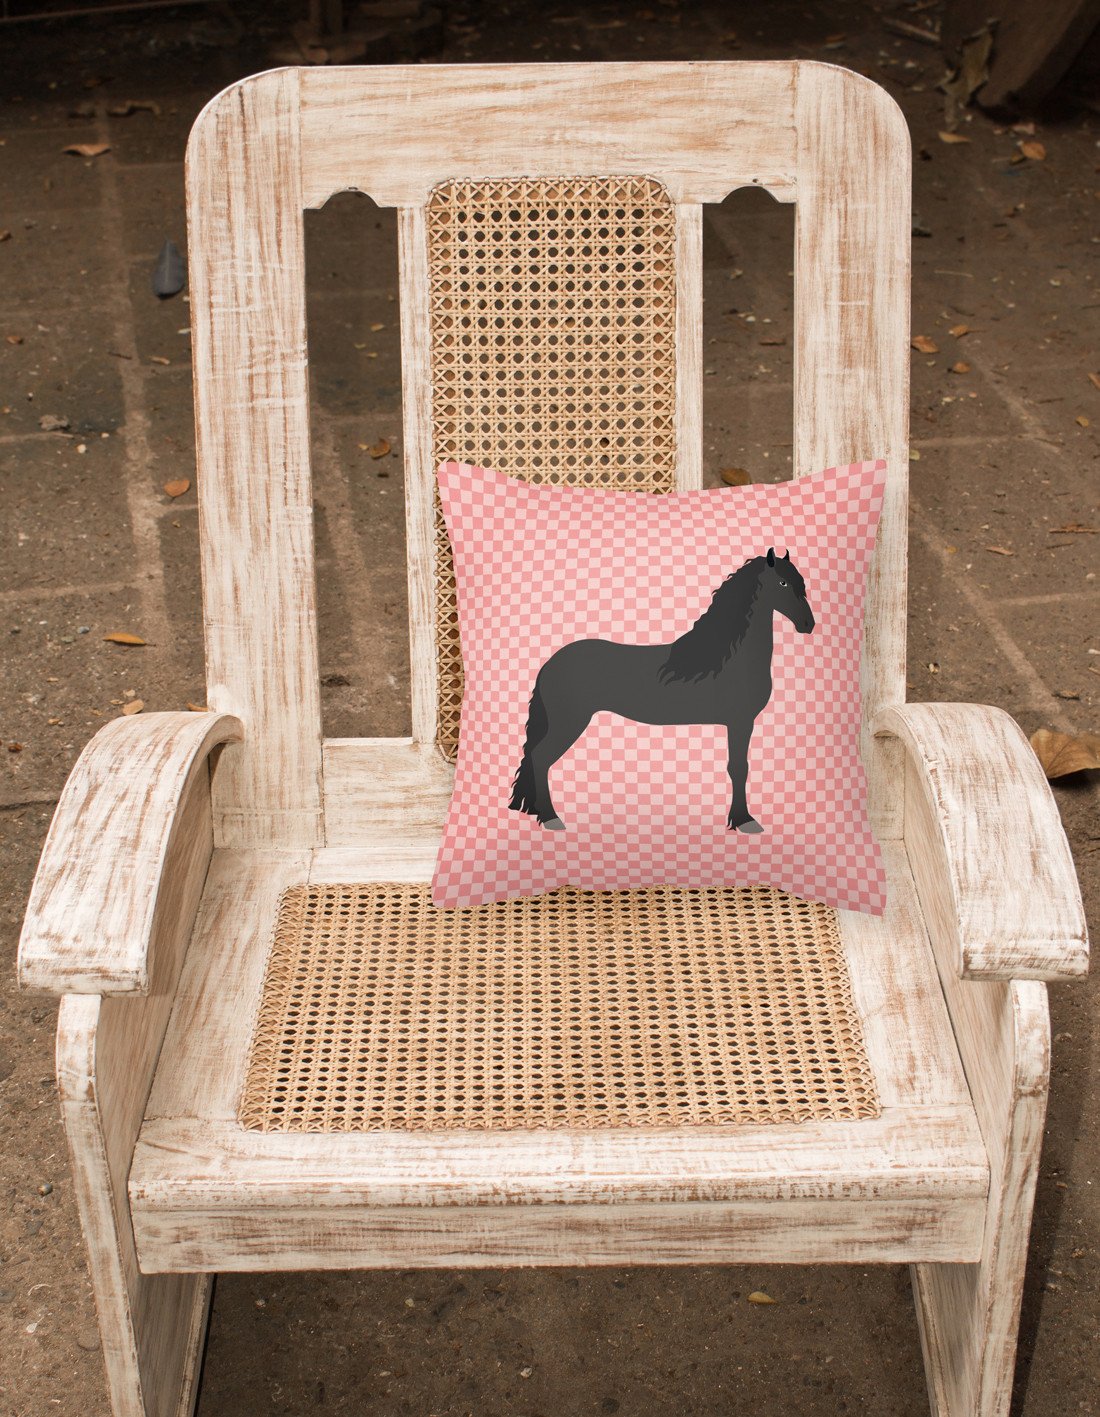 Friesian Horse Pink Check Fabric Decorative Pillow BB7915PW1818 by Caroline's Treasures